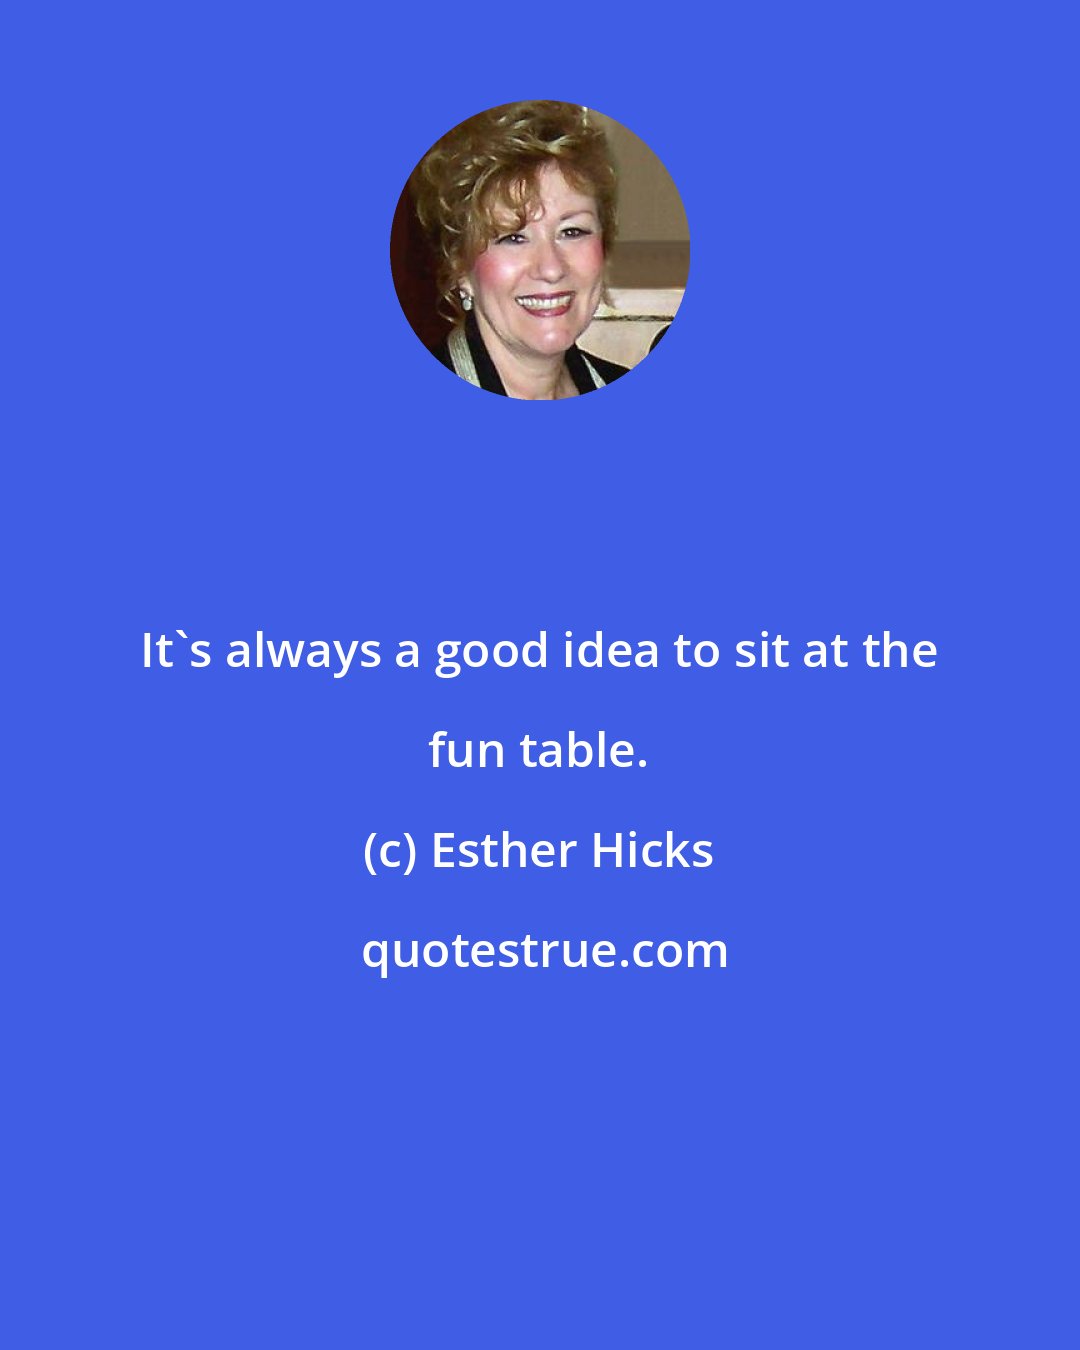 Esther Hicks: It's always a good idea to sit at the fun table.